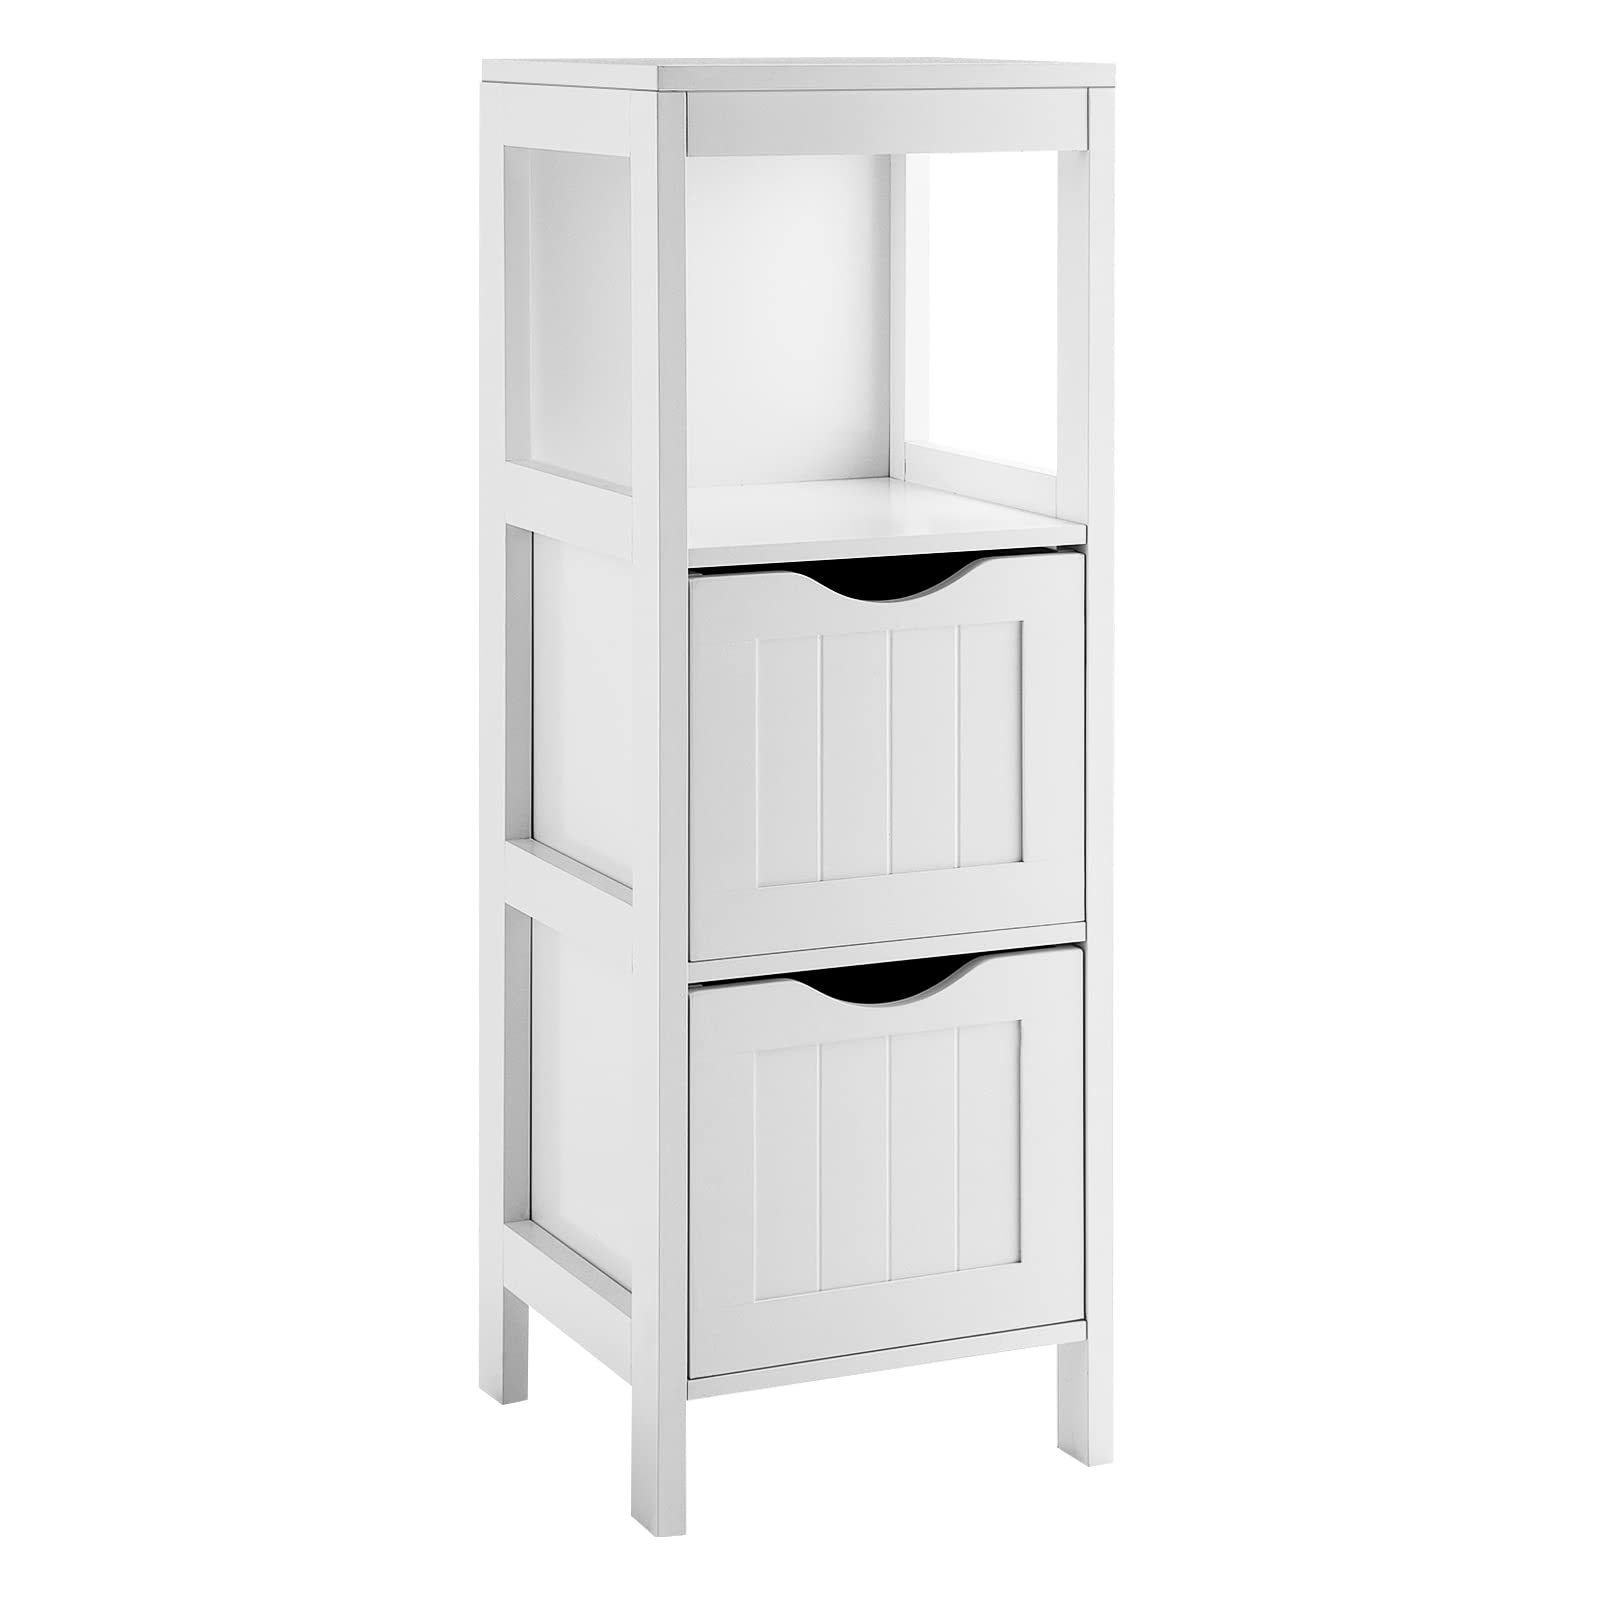 Bathroom Floor Cabinet with 2 Removable Drawers